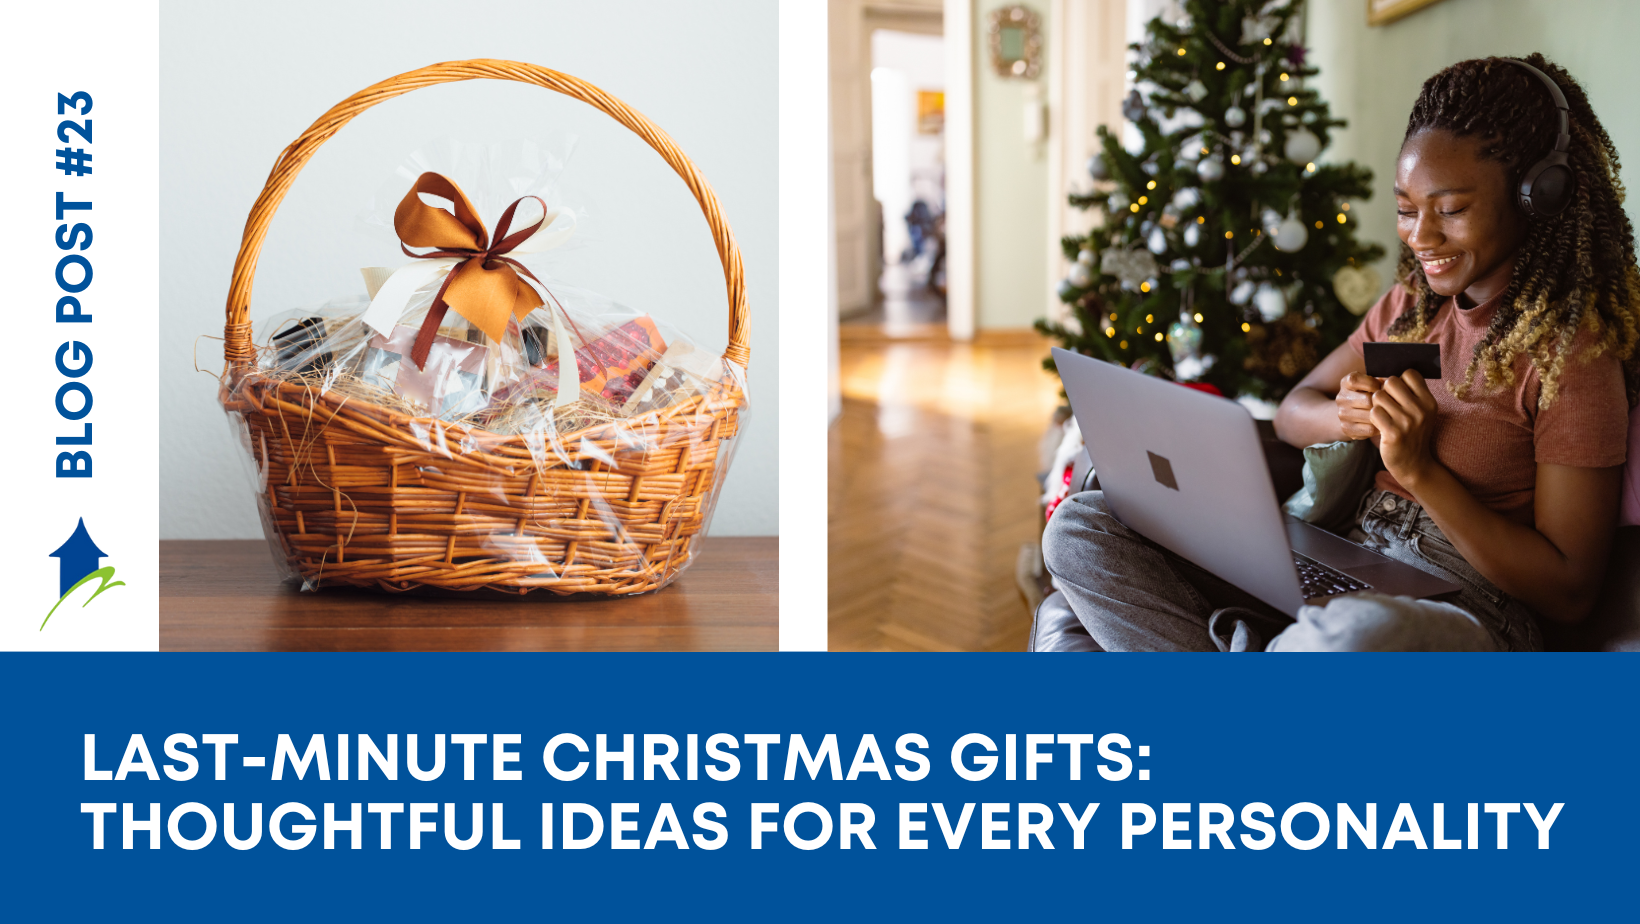 Last-Minute Christmas Gifts: Thoughtful Ideas for Every Personality